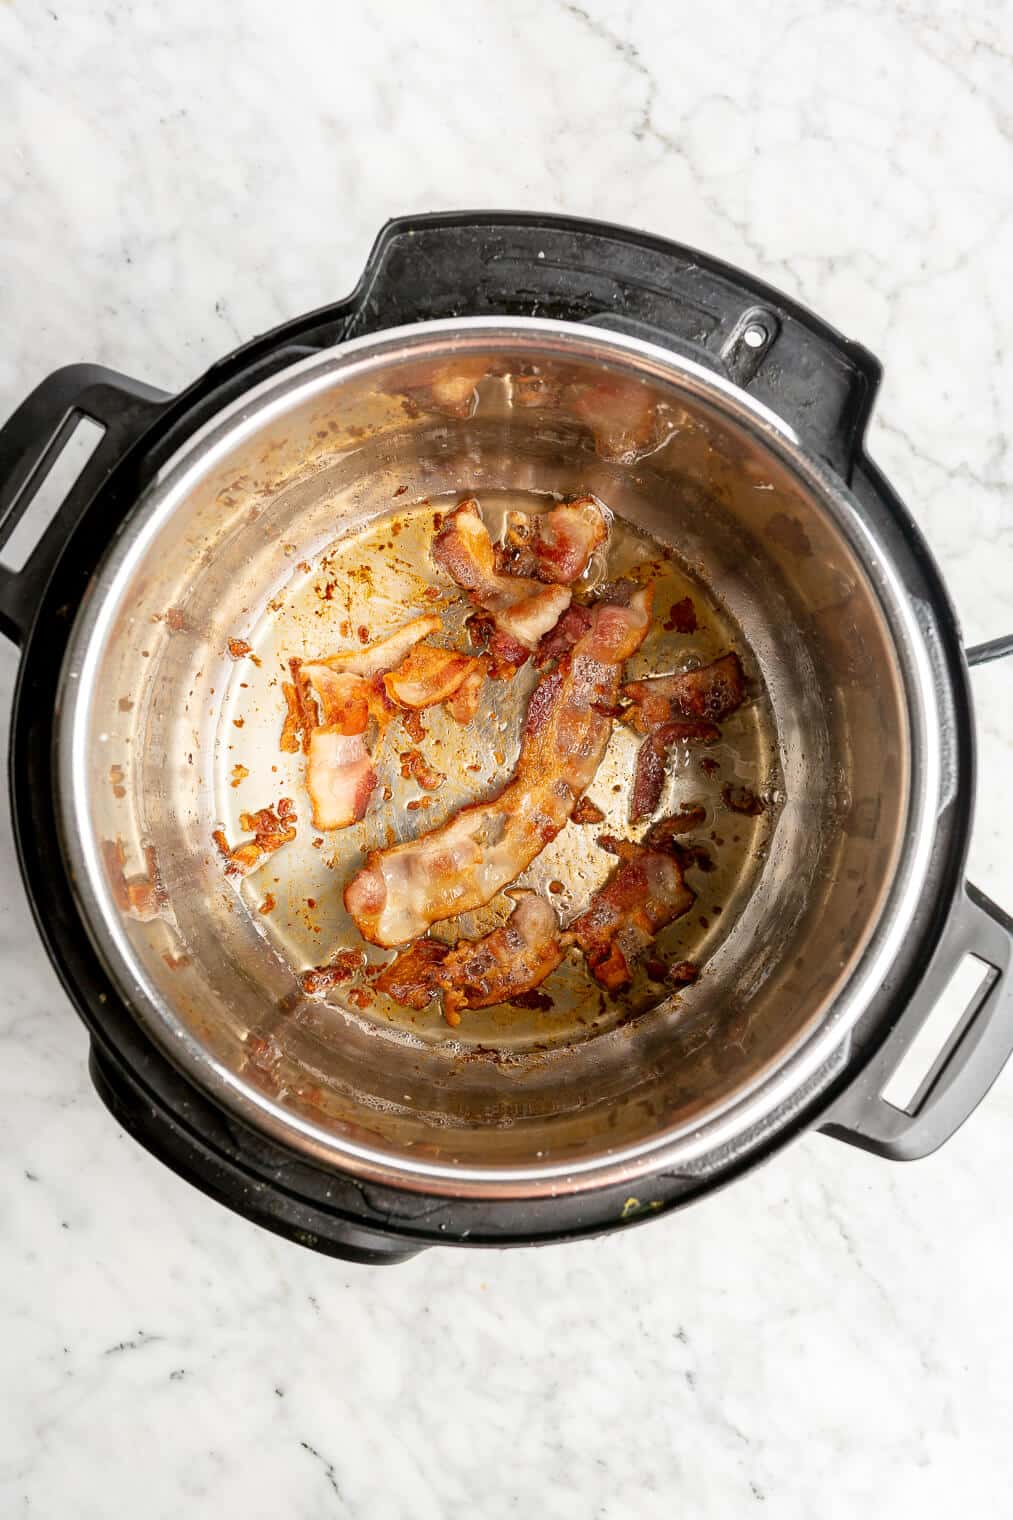 Strips of bacon cooking in the basin of an Instant Pot.